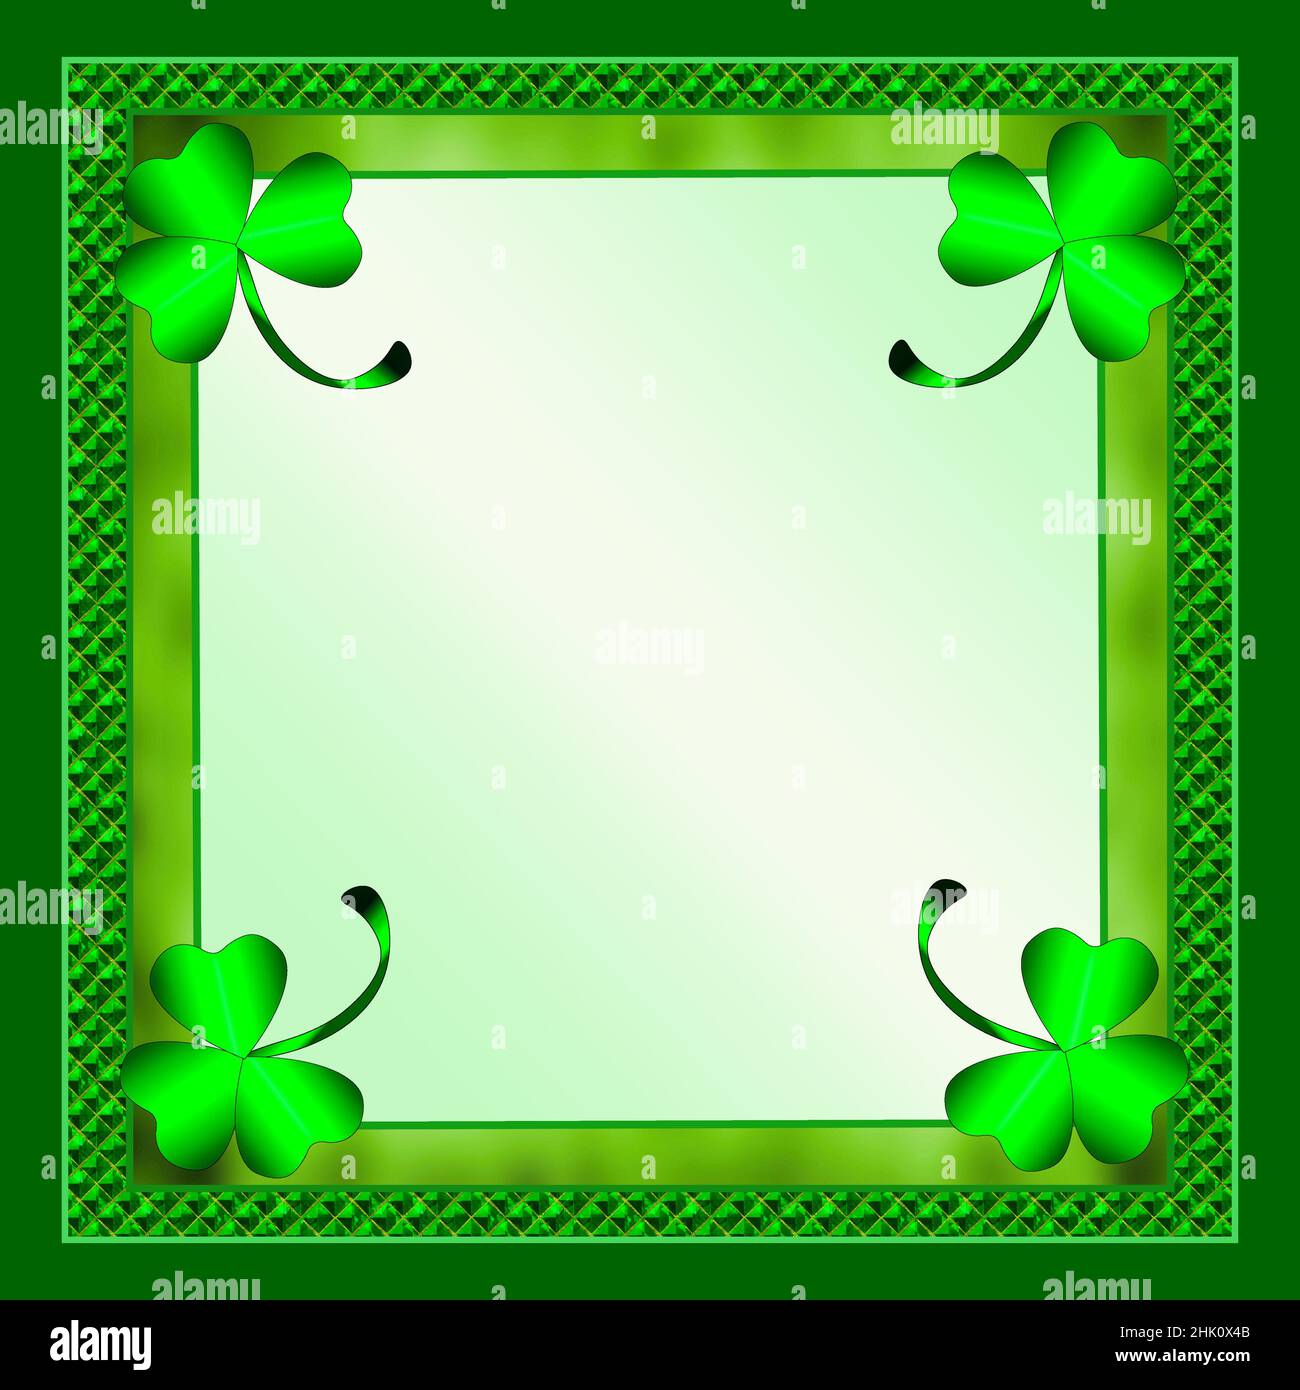 St. Patrick's Day Square Background with Large Gradient Shamrocks in each corner of this unique with different patterns background. Stock Photo